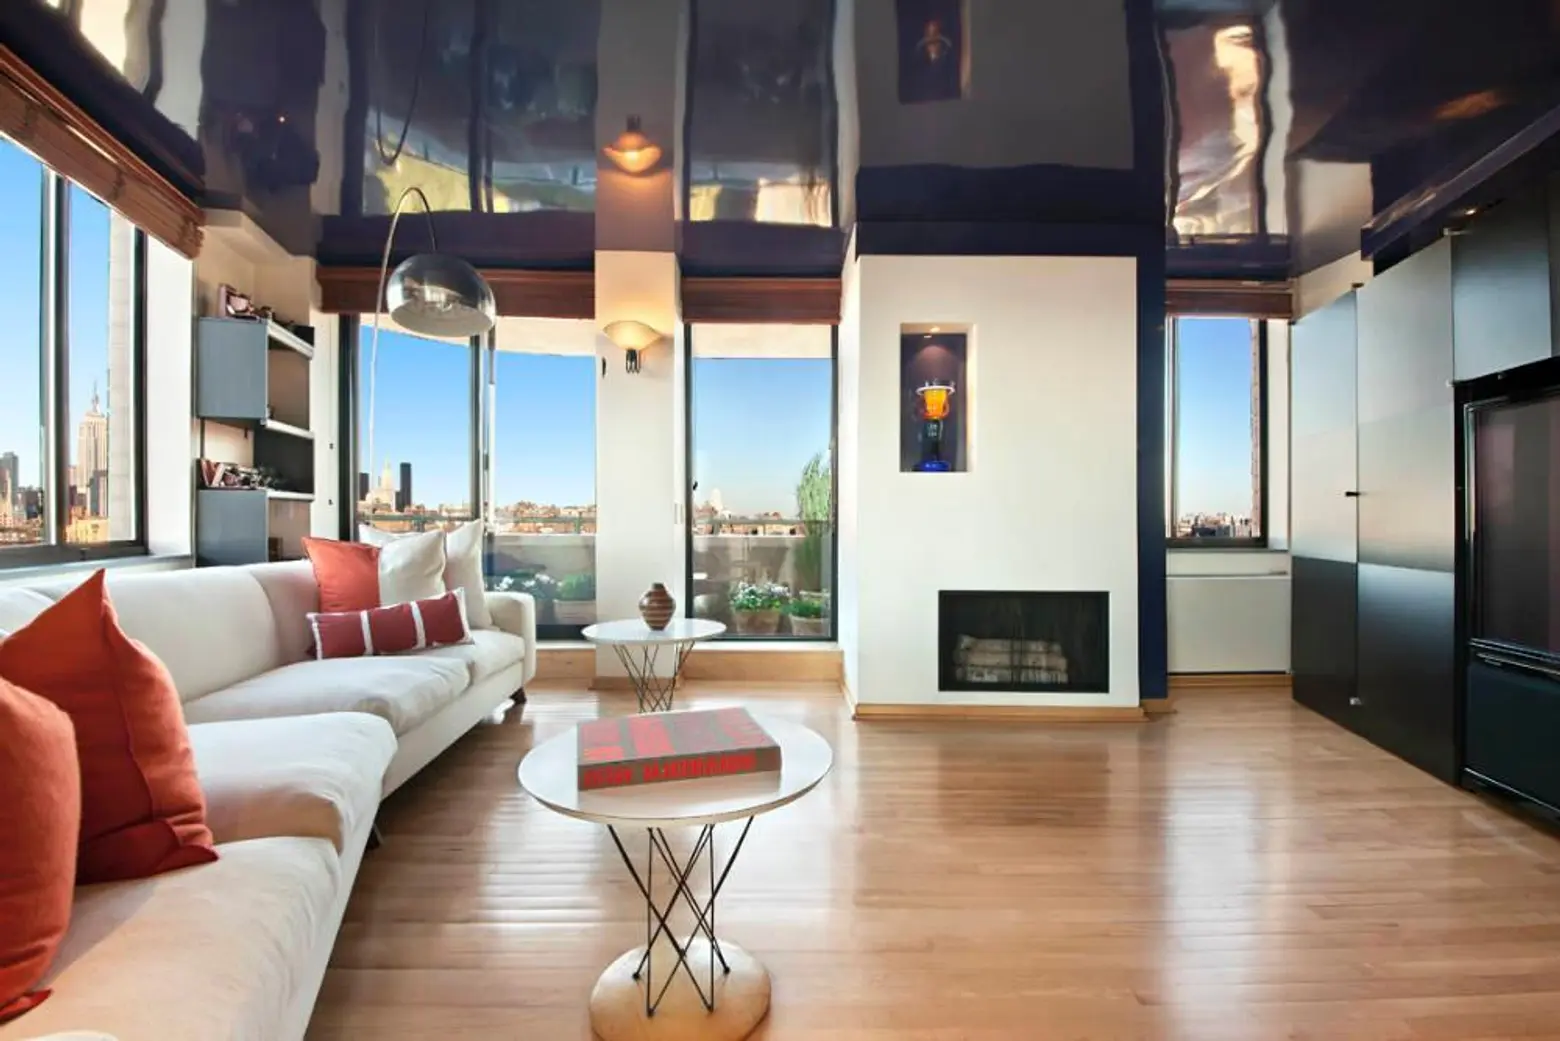 Rooms with a View: Sprawling West Village Penthouse Hits the Market for the First Time at $12.25M